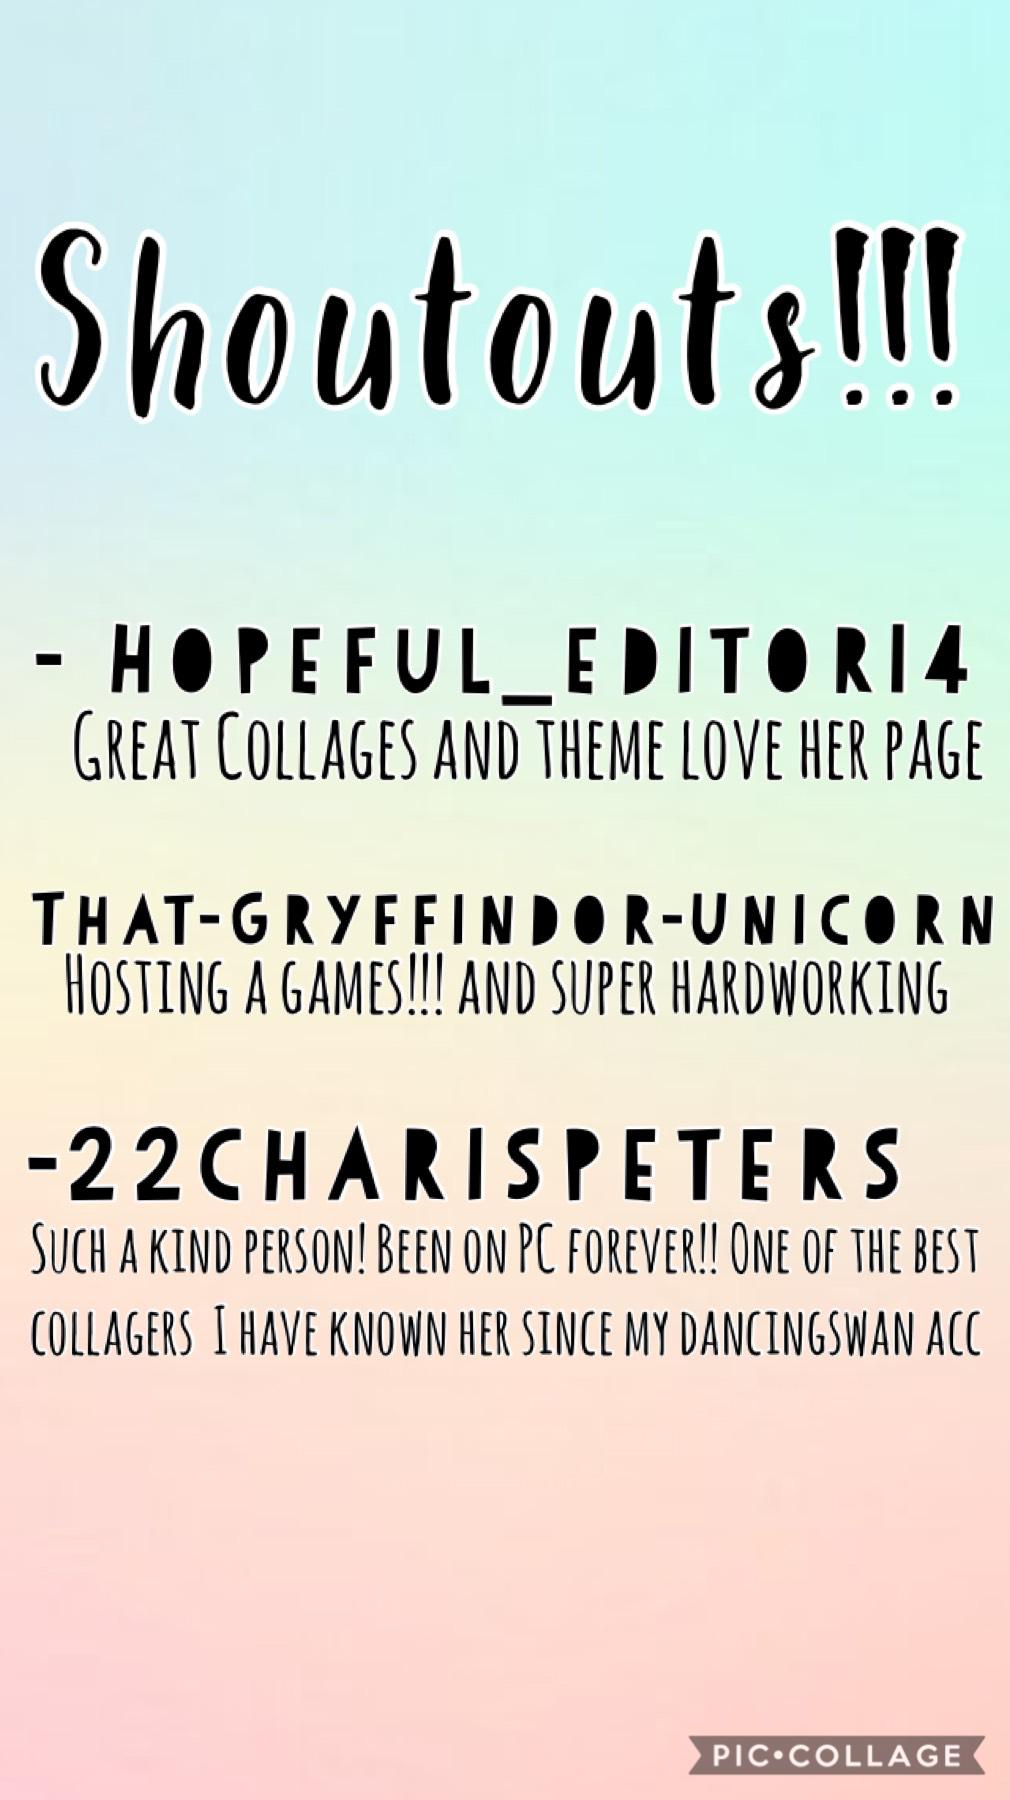 ✨TAP✨
Sorry if I spelled anything wrong!
@22charispeters
@That-Gryffindor-Unicorn
@hopeful_editor14